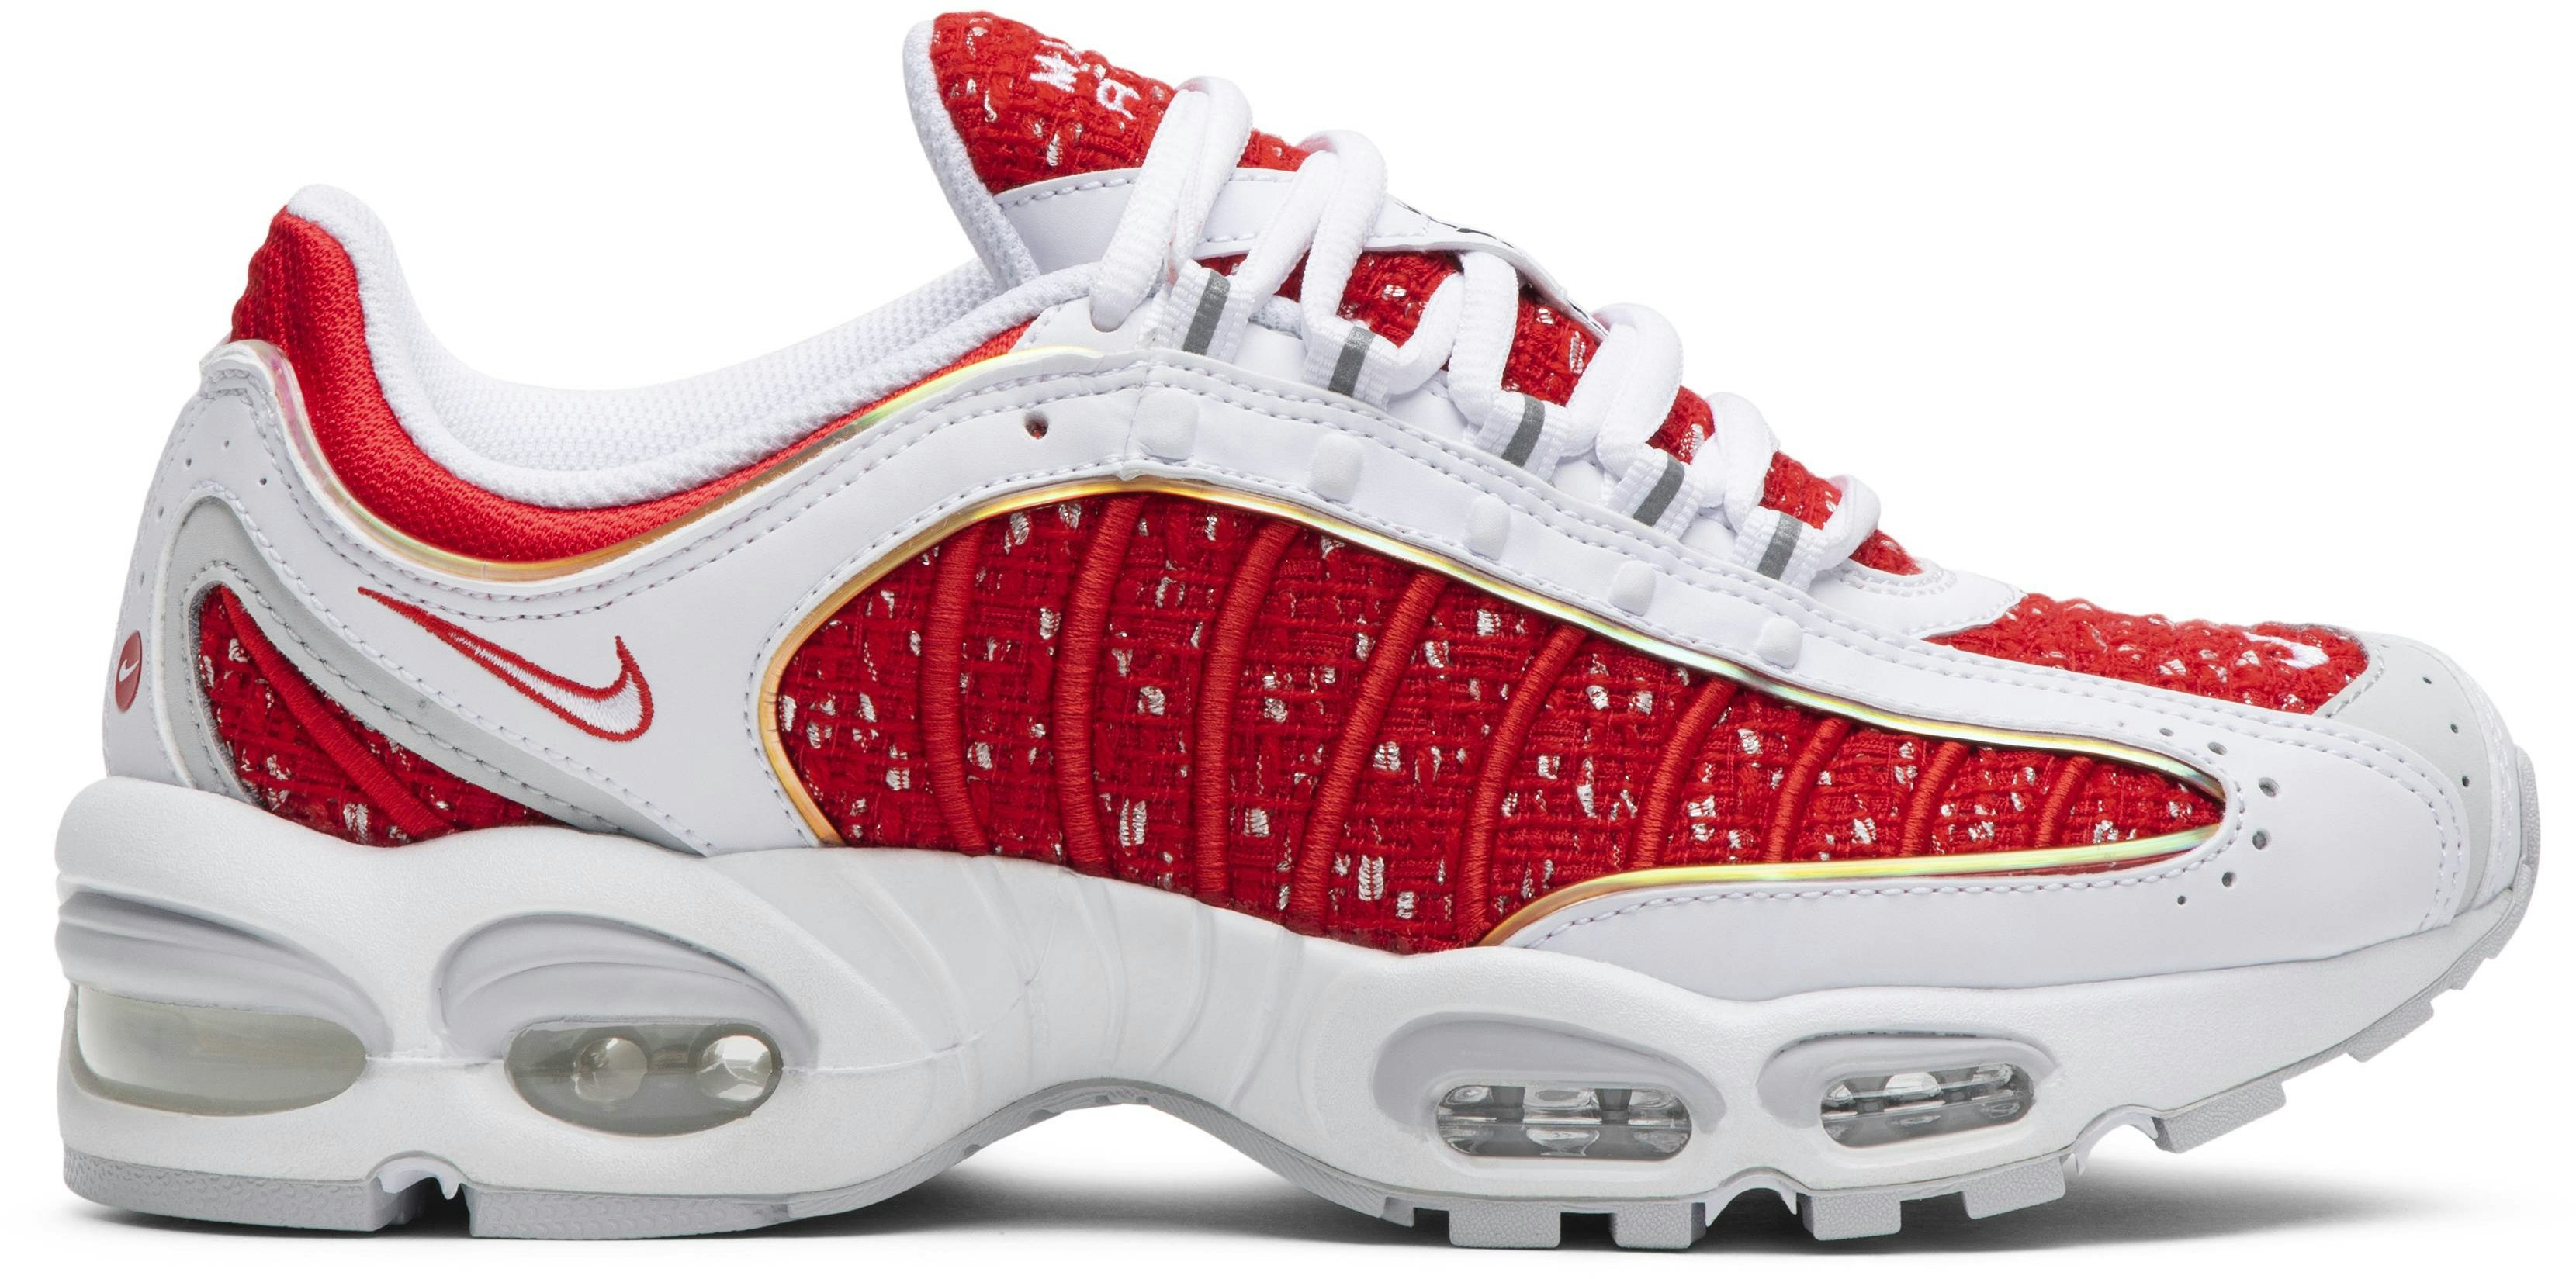 Supreme x Nike Air Max Tailwind 4 'University Red' - AT3854-100